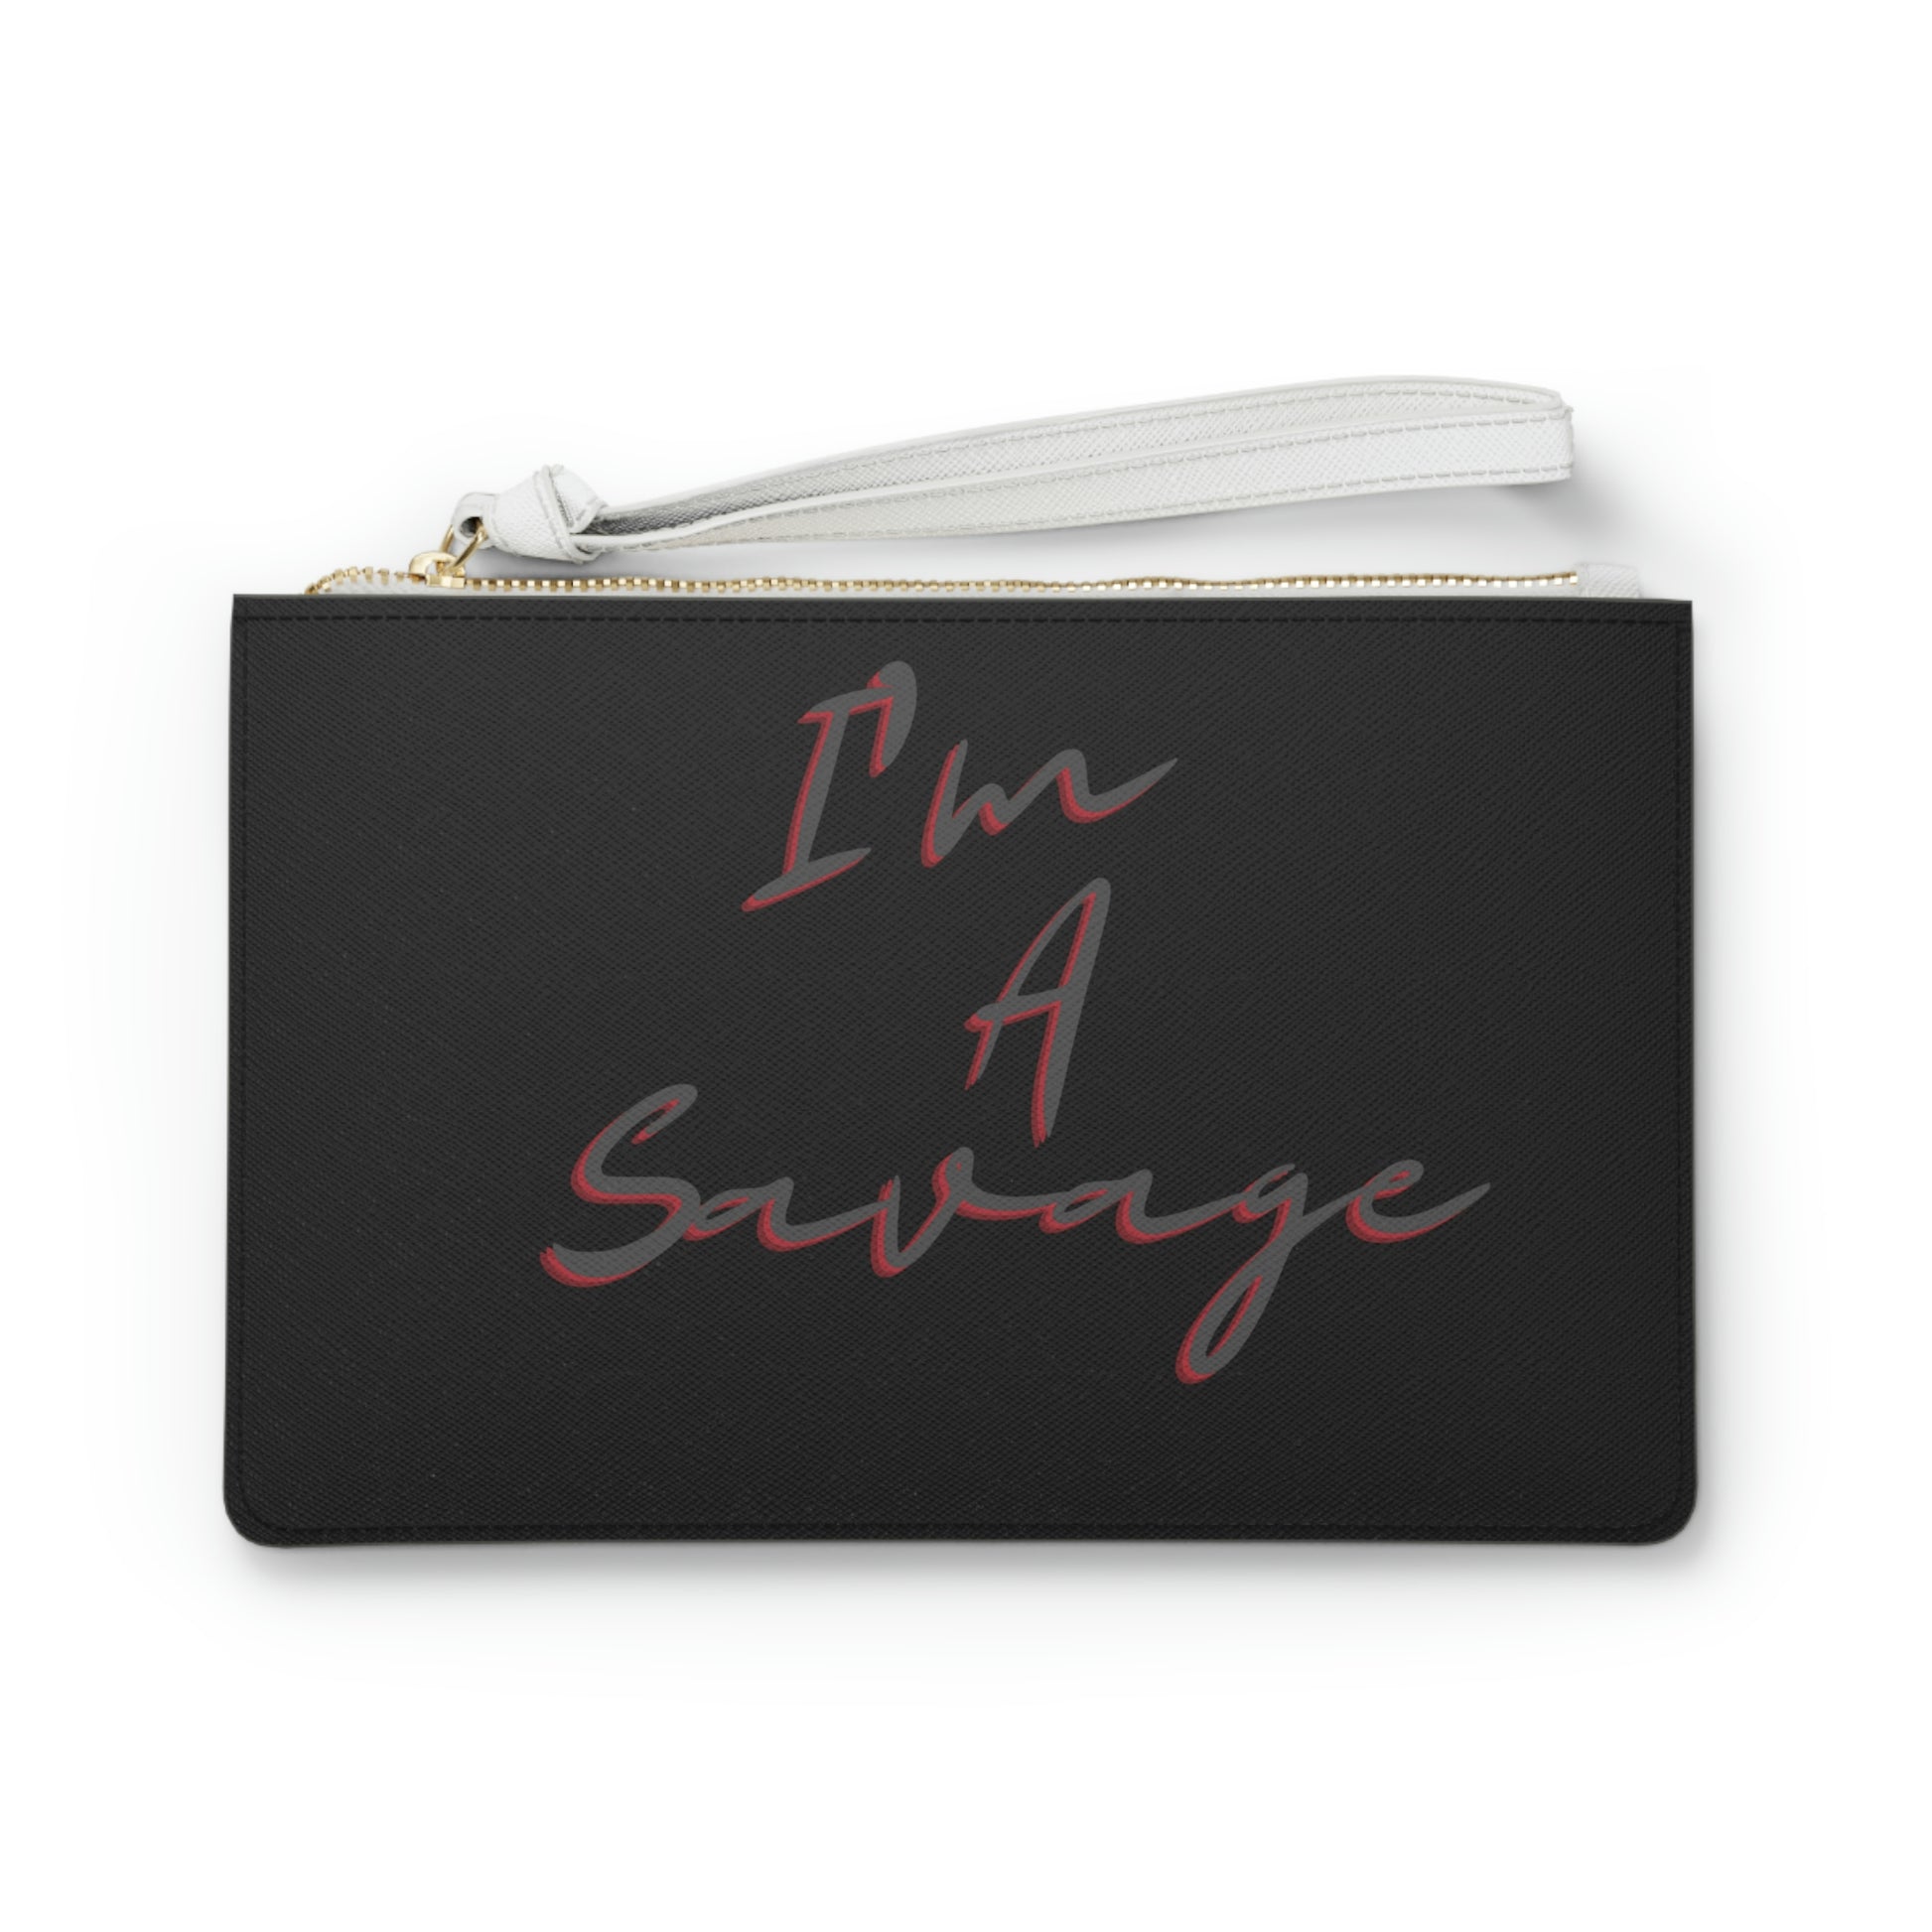 Savage Clutch Bag | BKLA | Shoes & Accessories | shoes, hats, phone covers, tote bags, clutch bags